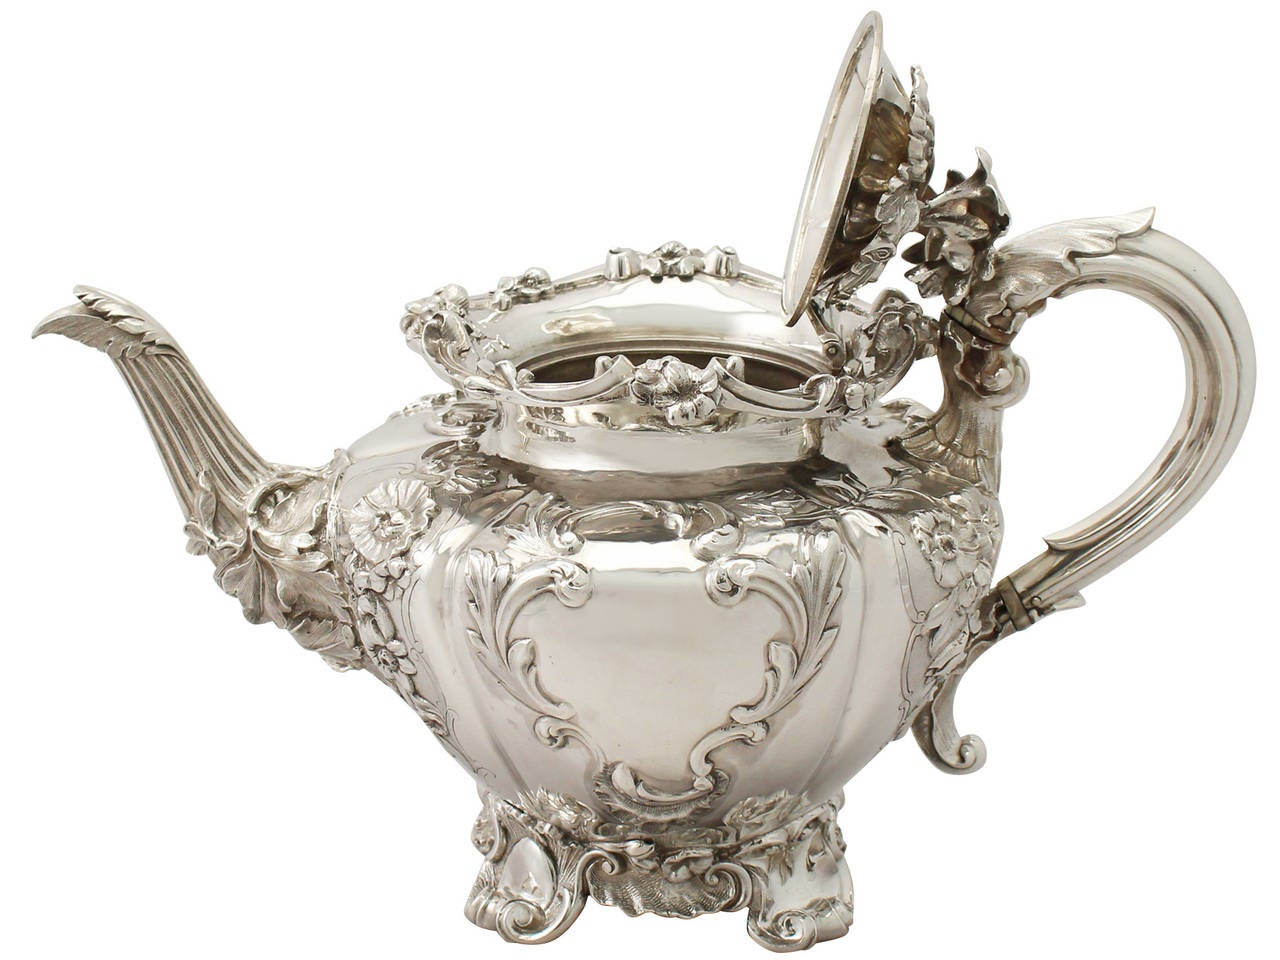 English Sterling Silver Teapot, Antique Victorian